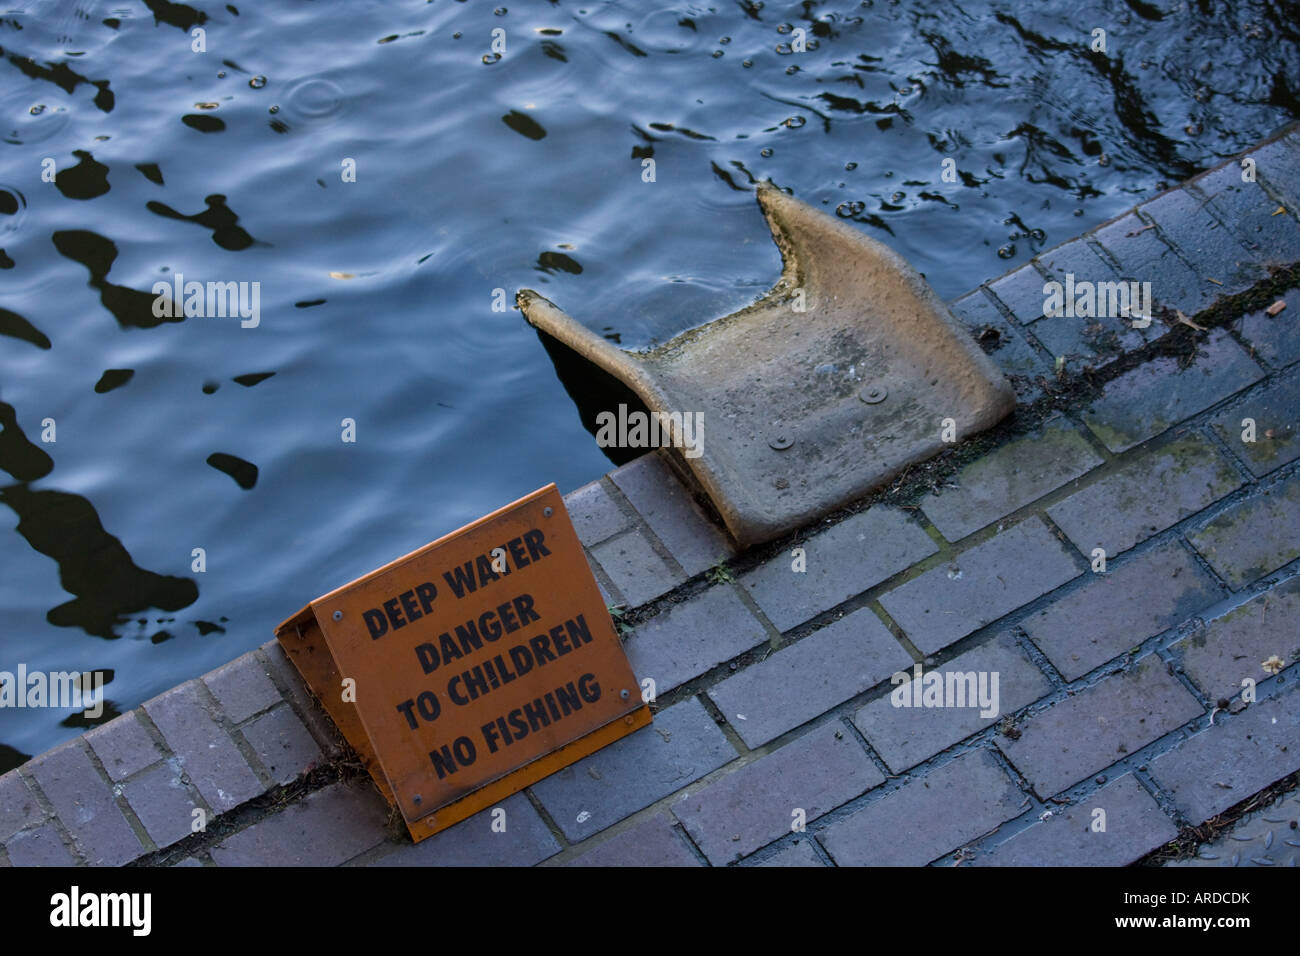 Deep water danger to children no fishing sign next to 'slide' in Barbican complex City of London GB UK Stock Photo